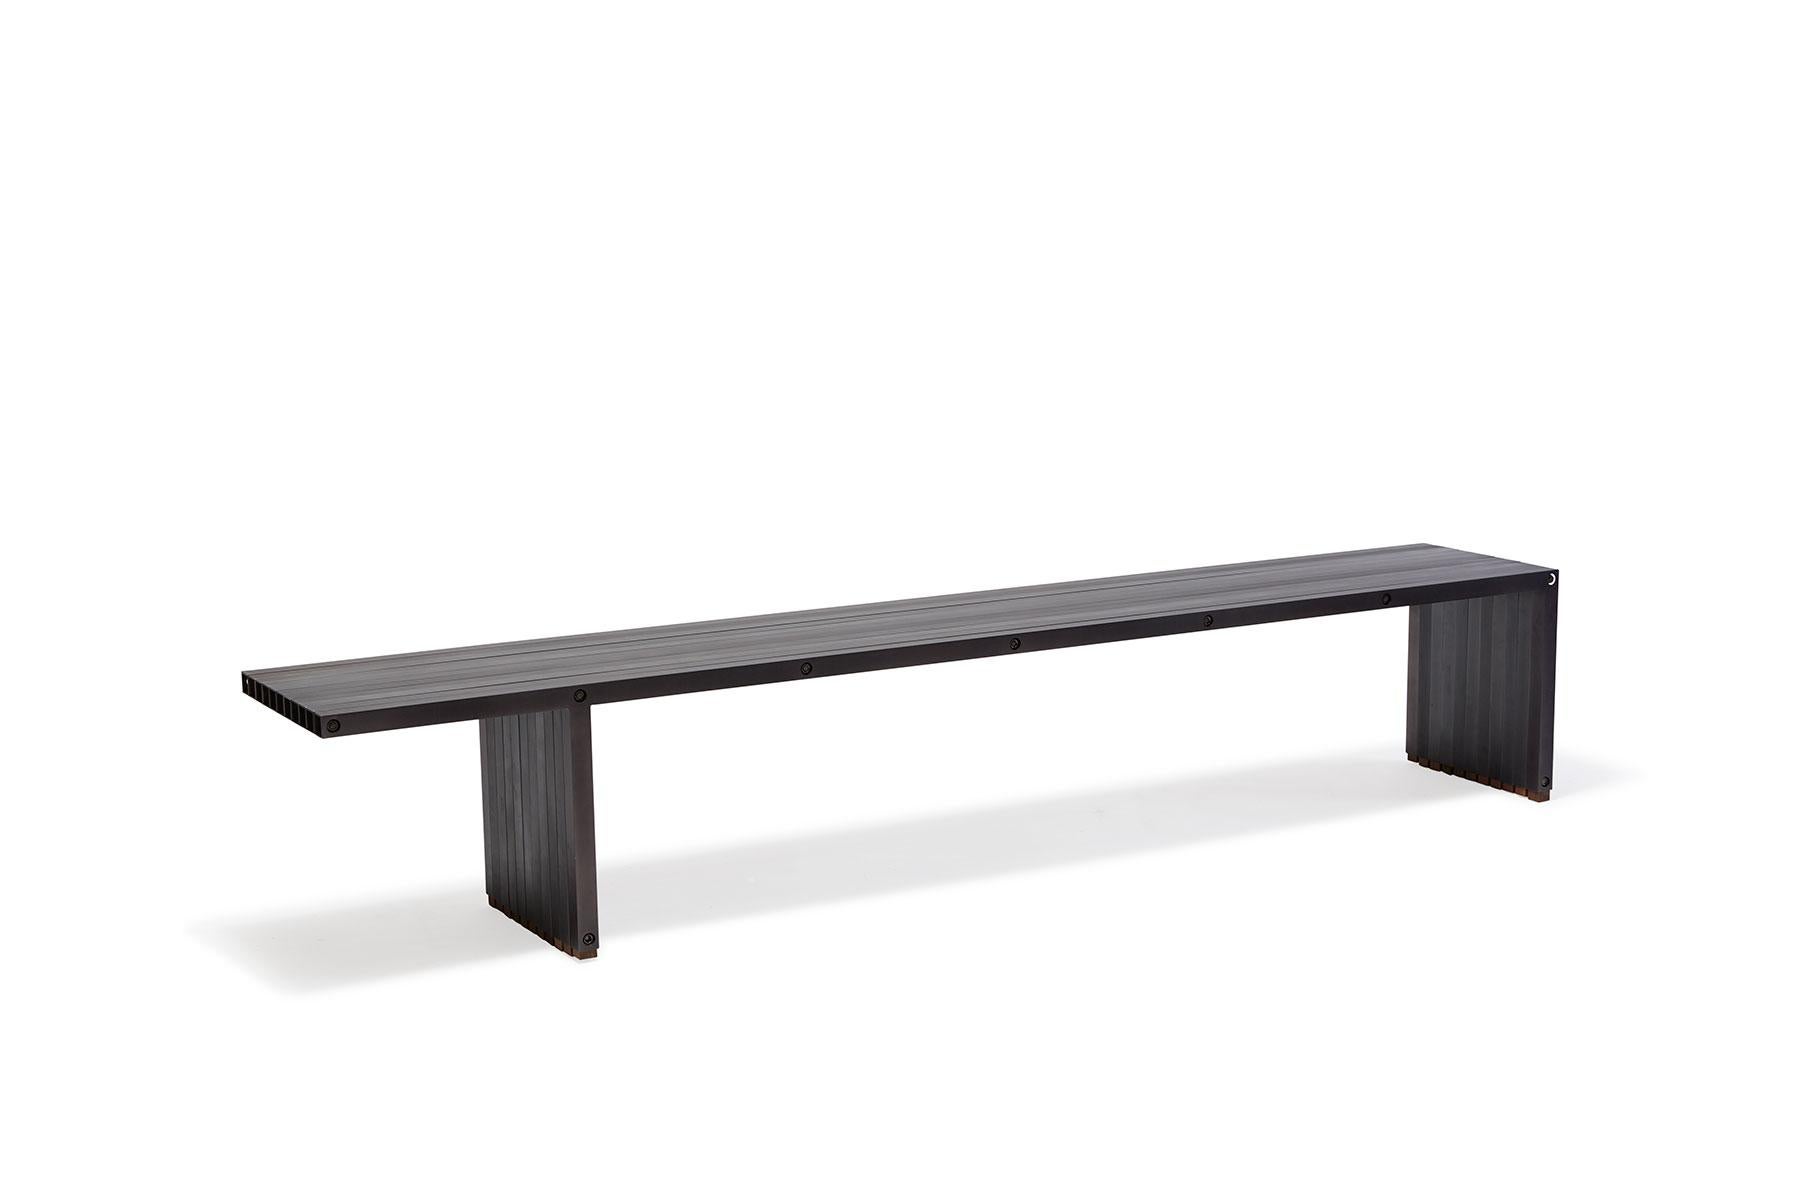 American Blackened Aluminum Compression Bench For Sale